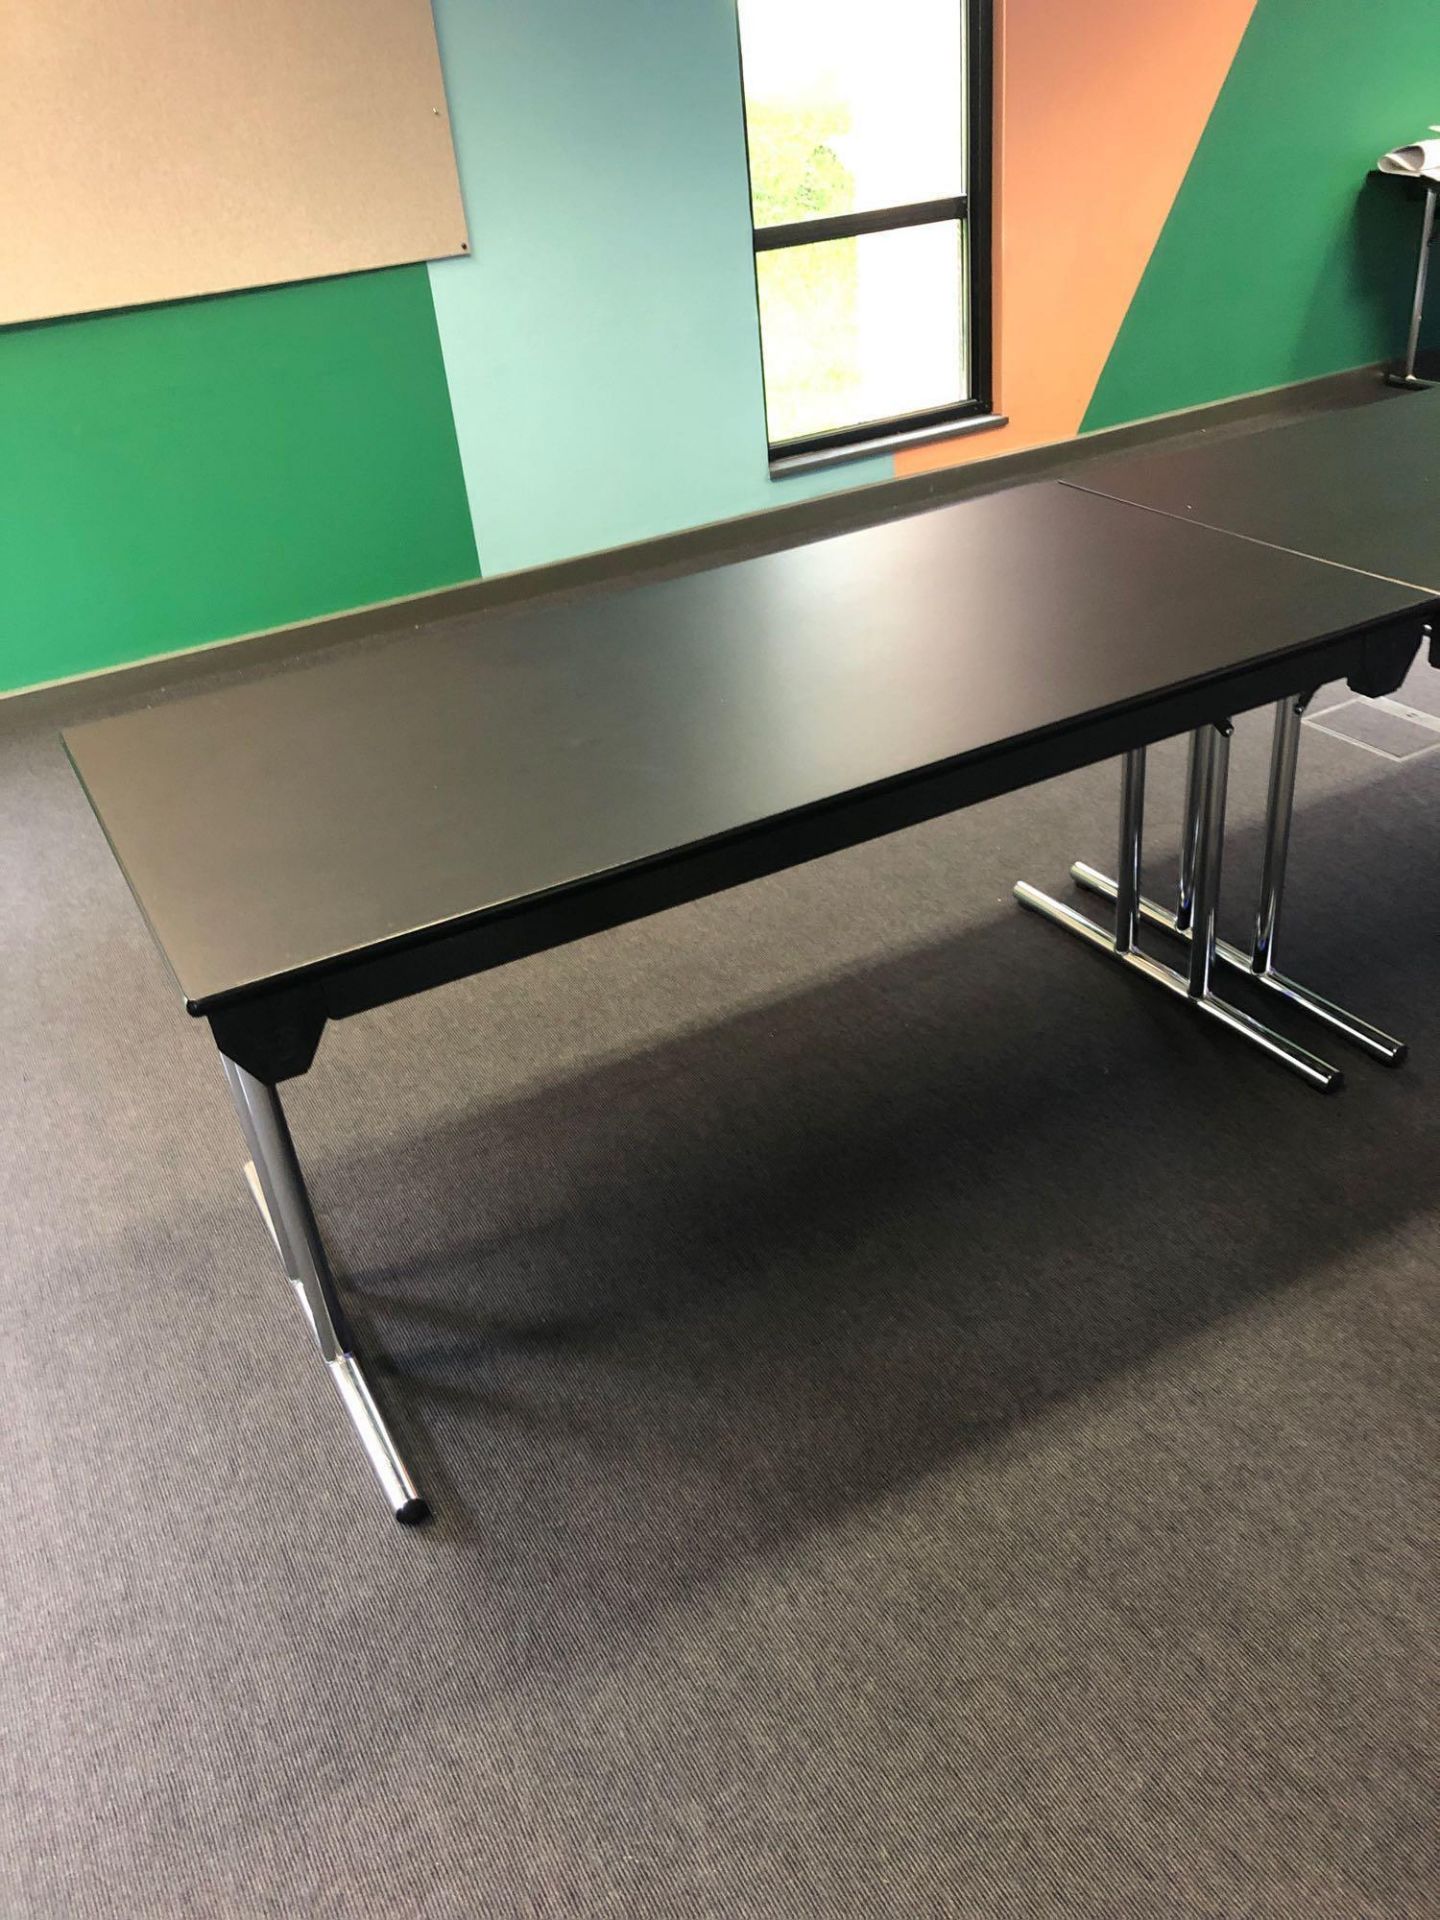 8x Burgess Furnitures Black And Chrome Conference Tables 1500 x 750 Mm - Image 2 of 2